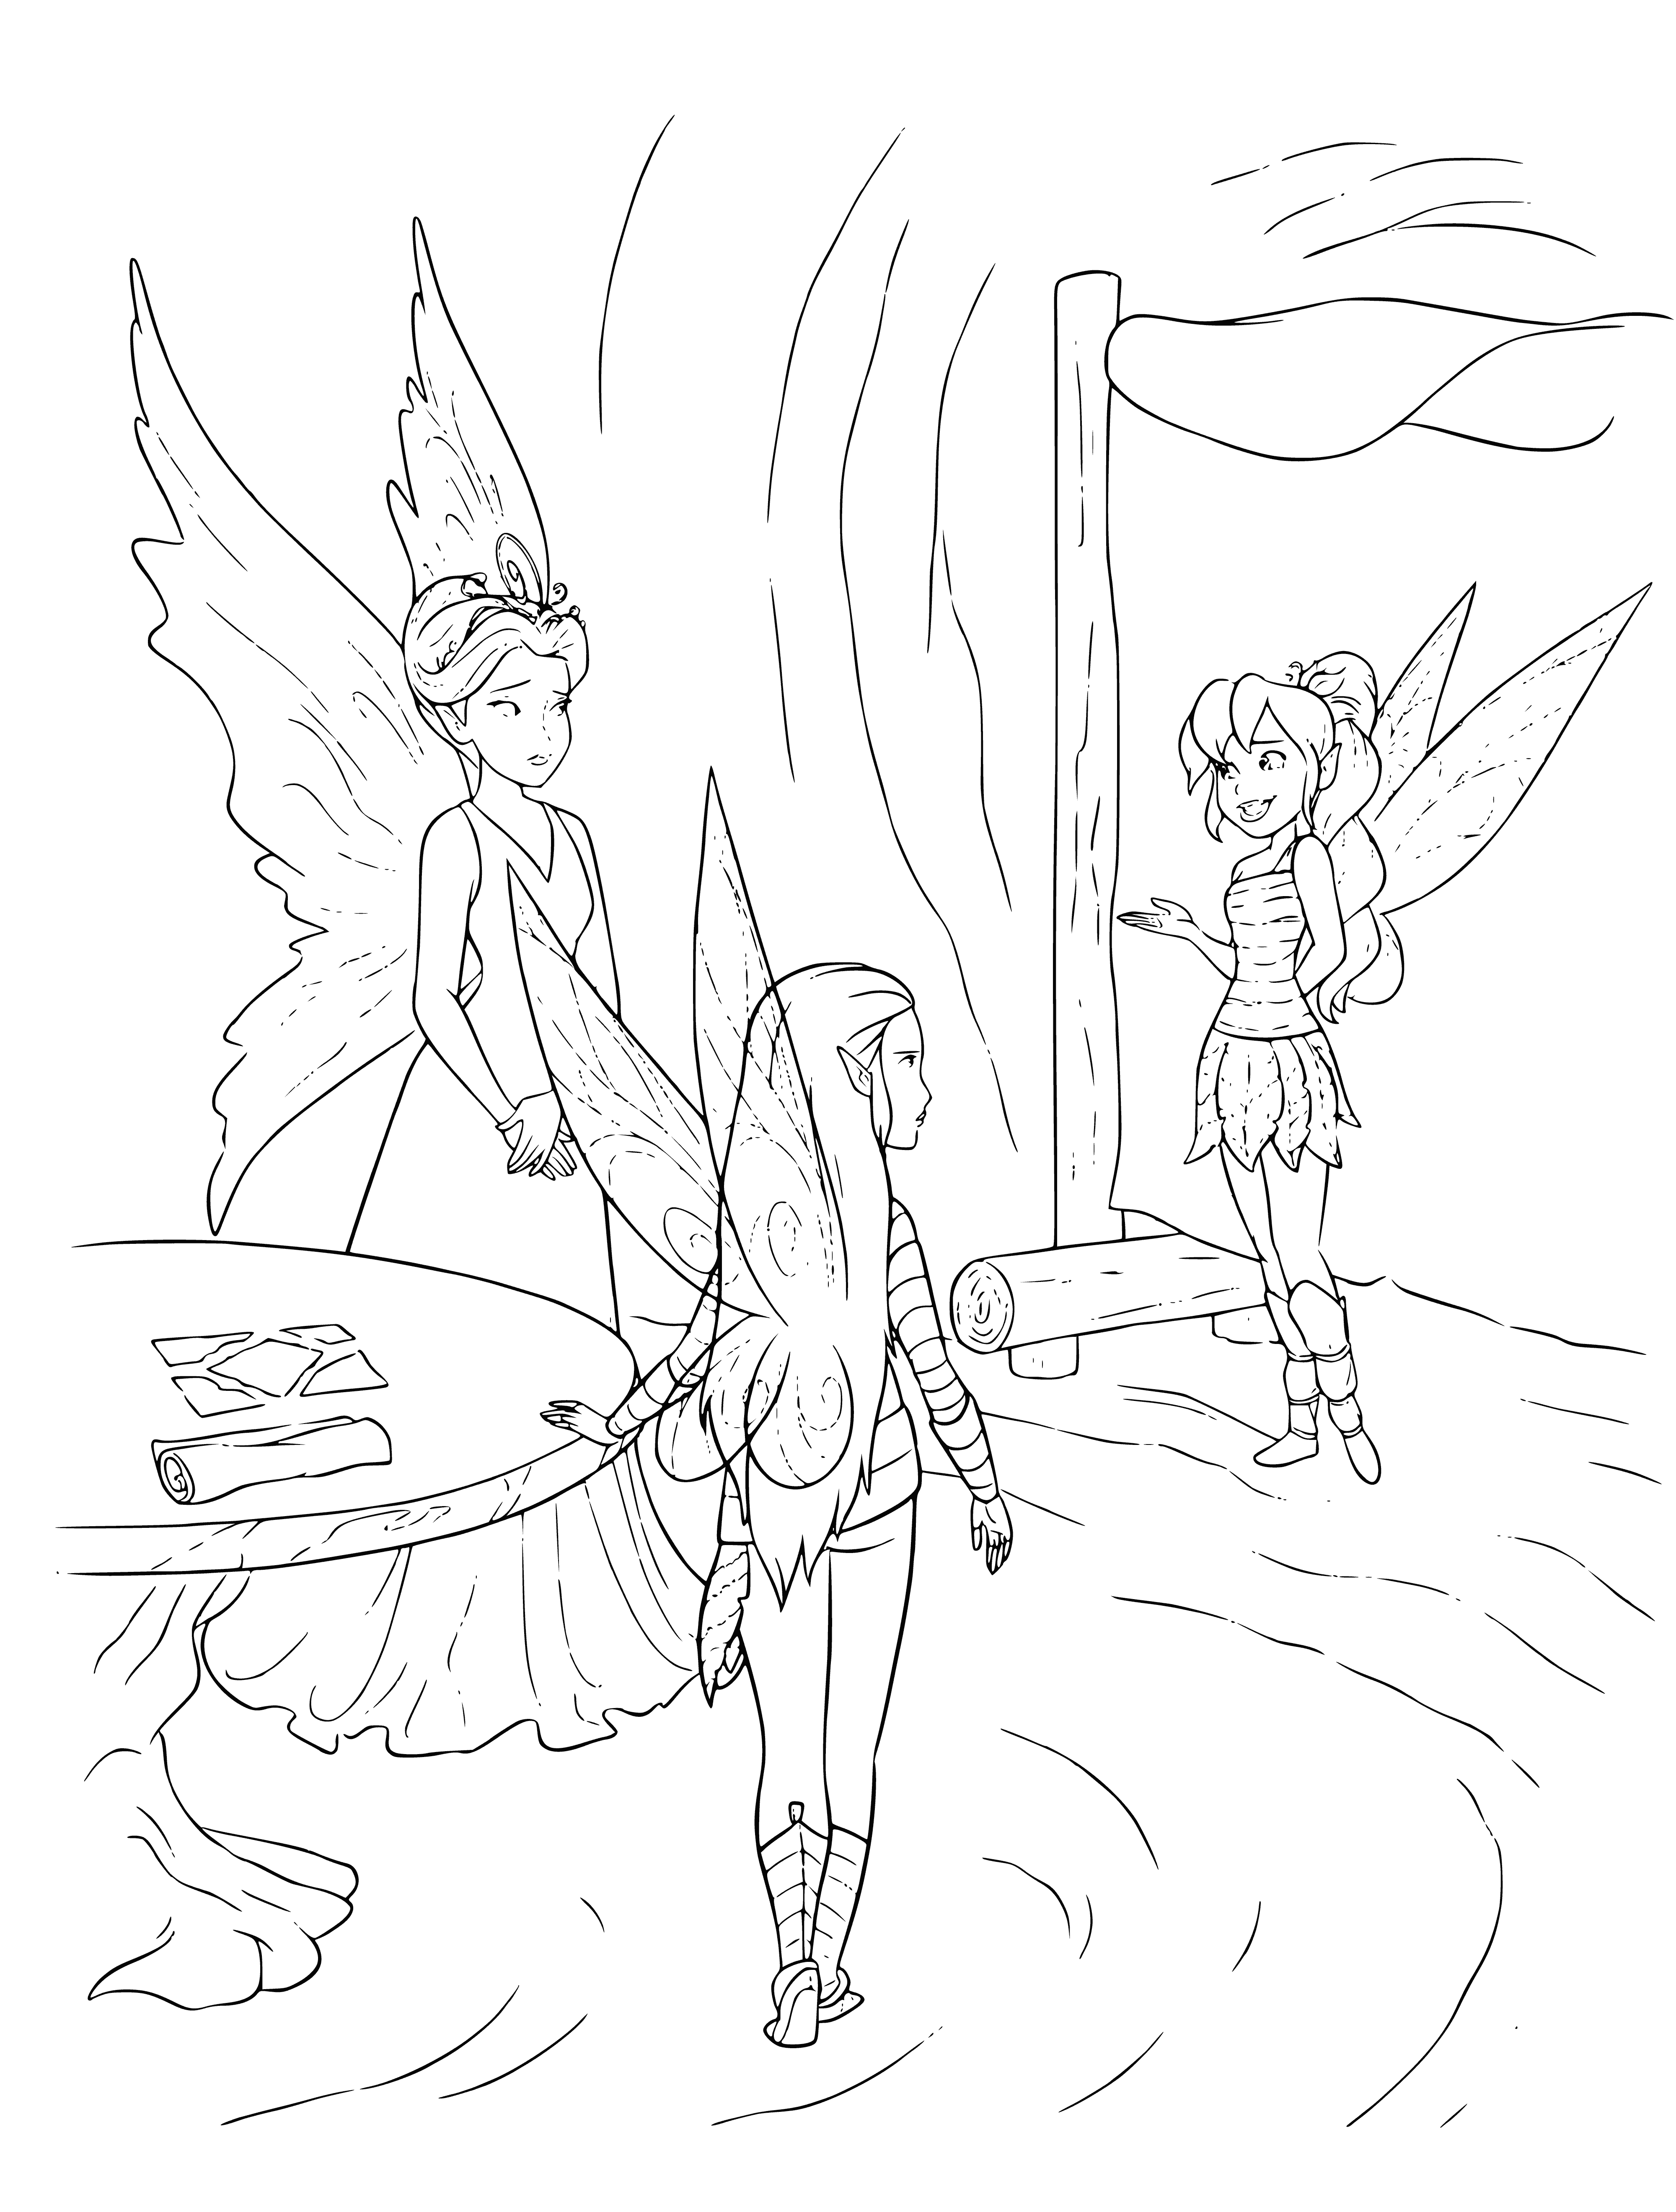 coloring page: Nyx helps Queen Clarion understand the Beast, which turns out to be a misjudged good creature trying to protect its forest. They become friends.